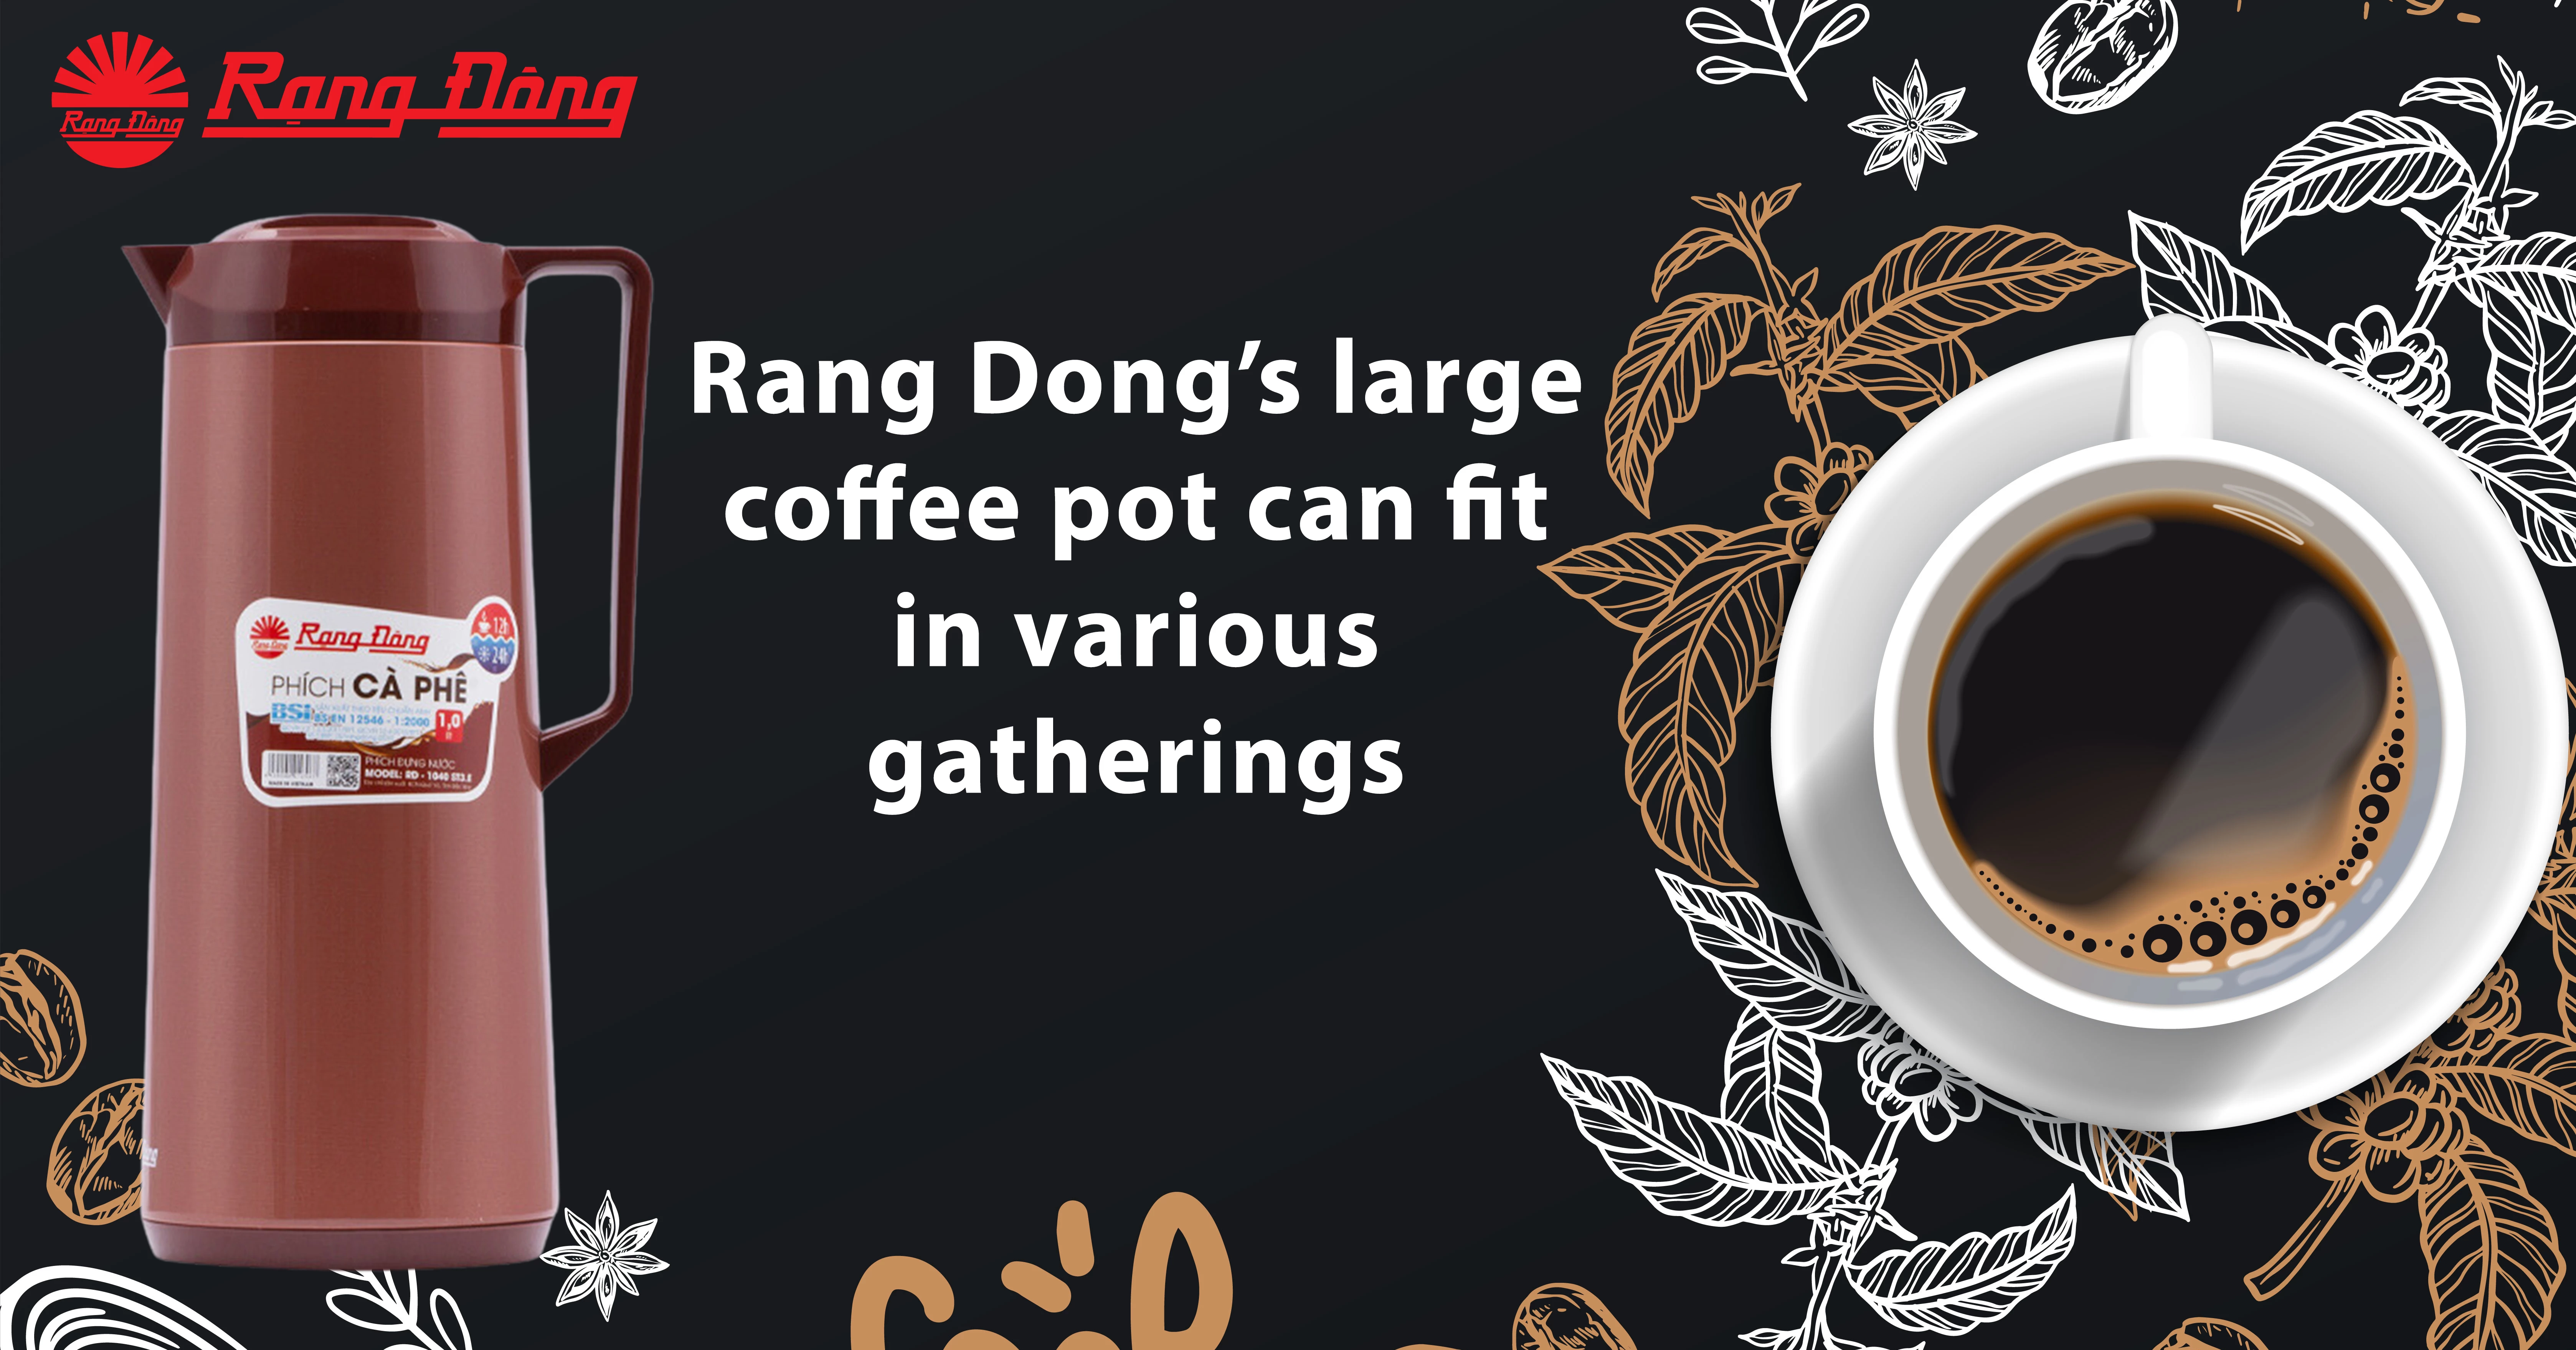 Rang Dong’s large coffee pot can fit in various gatherings